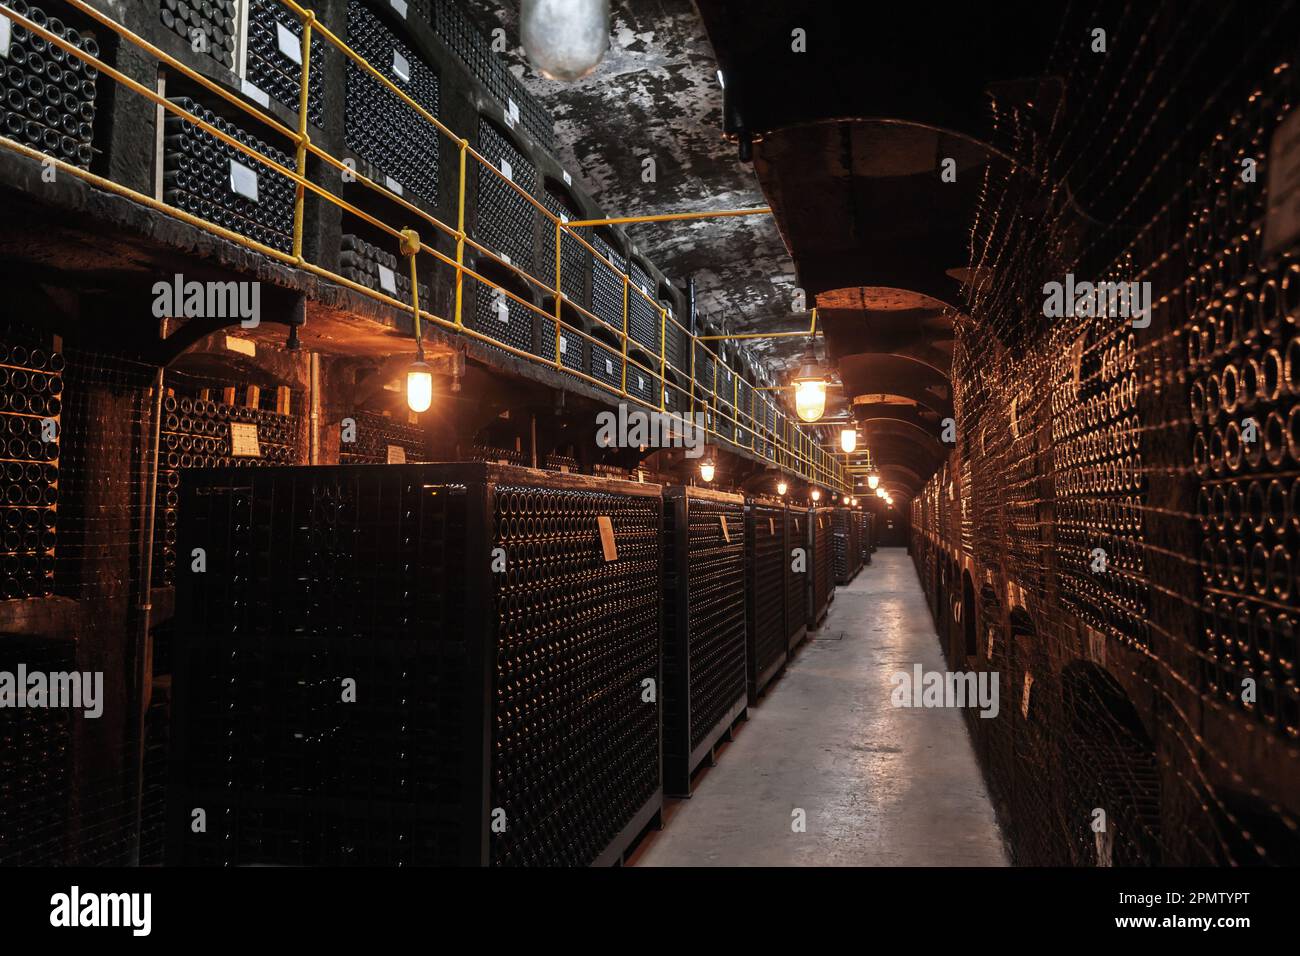 Winery interior perspective view, dark corridor with stacked bottles Stock Photo